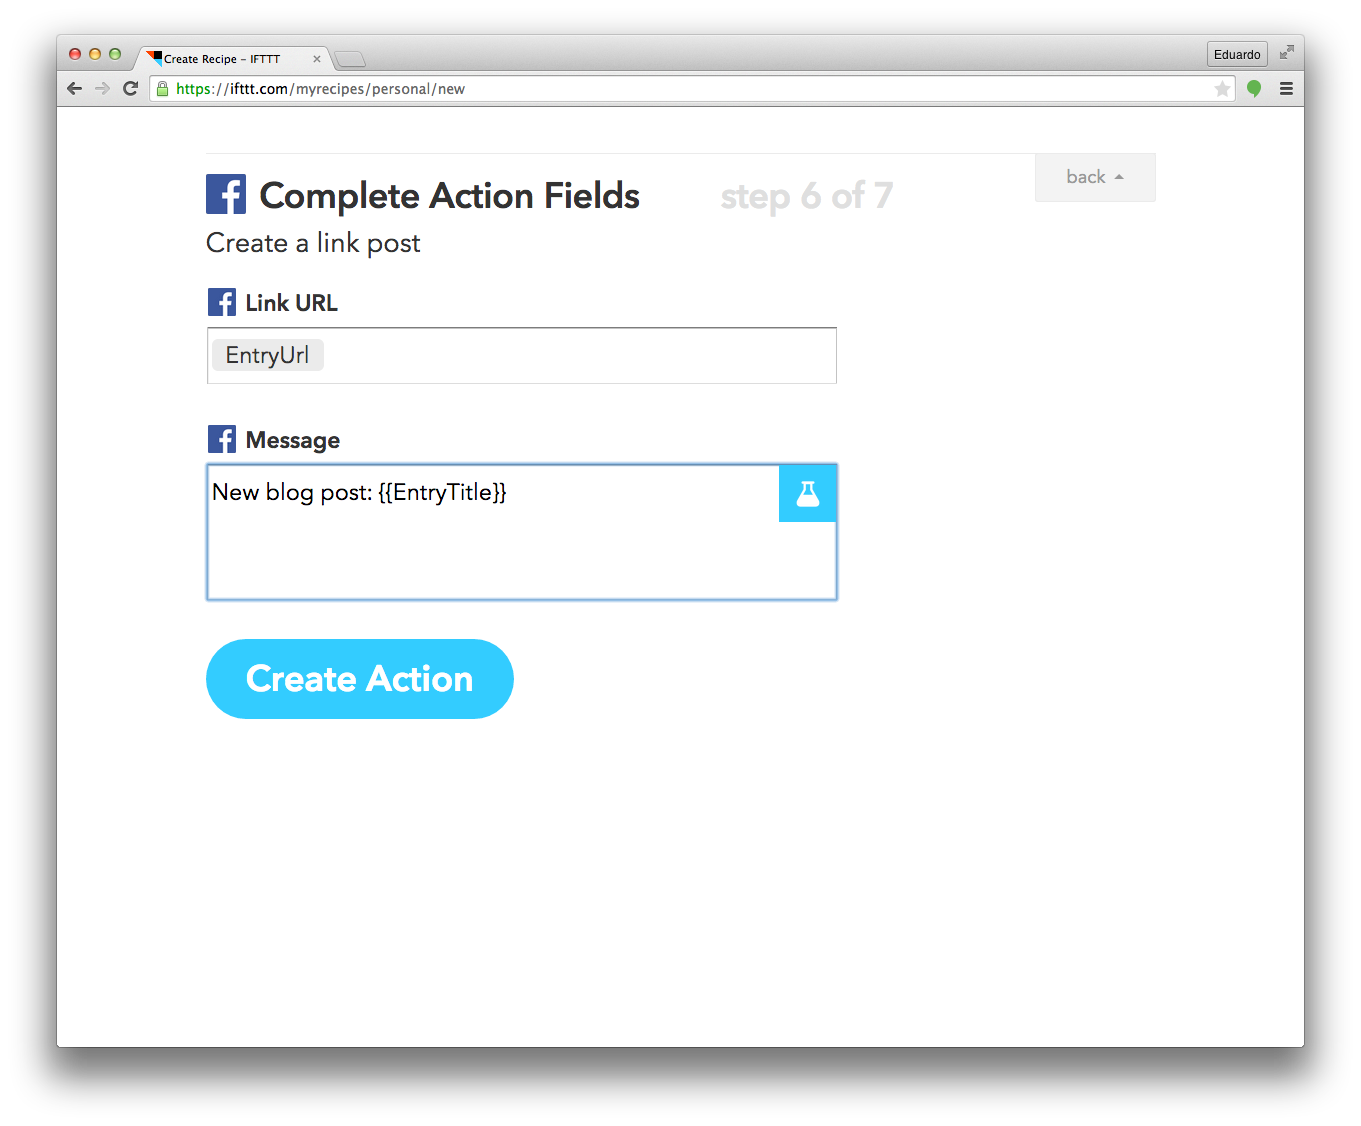 Setting up my Facebook feed on IFTTT (step 6 of 7)